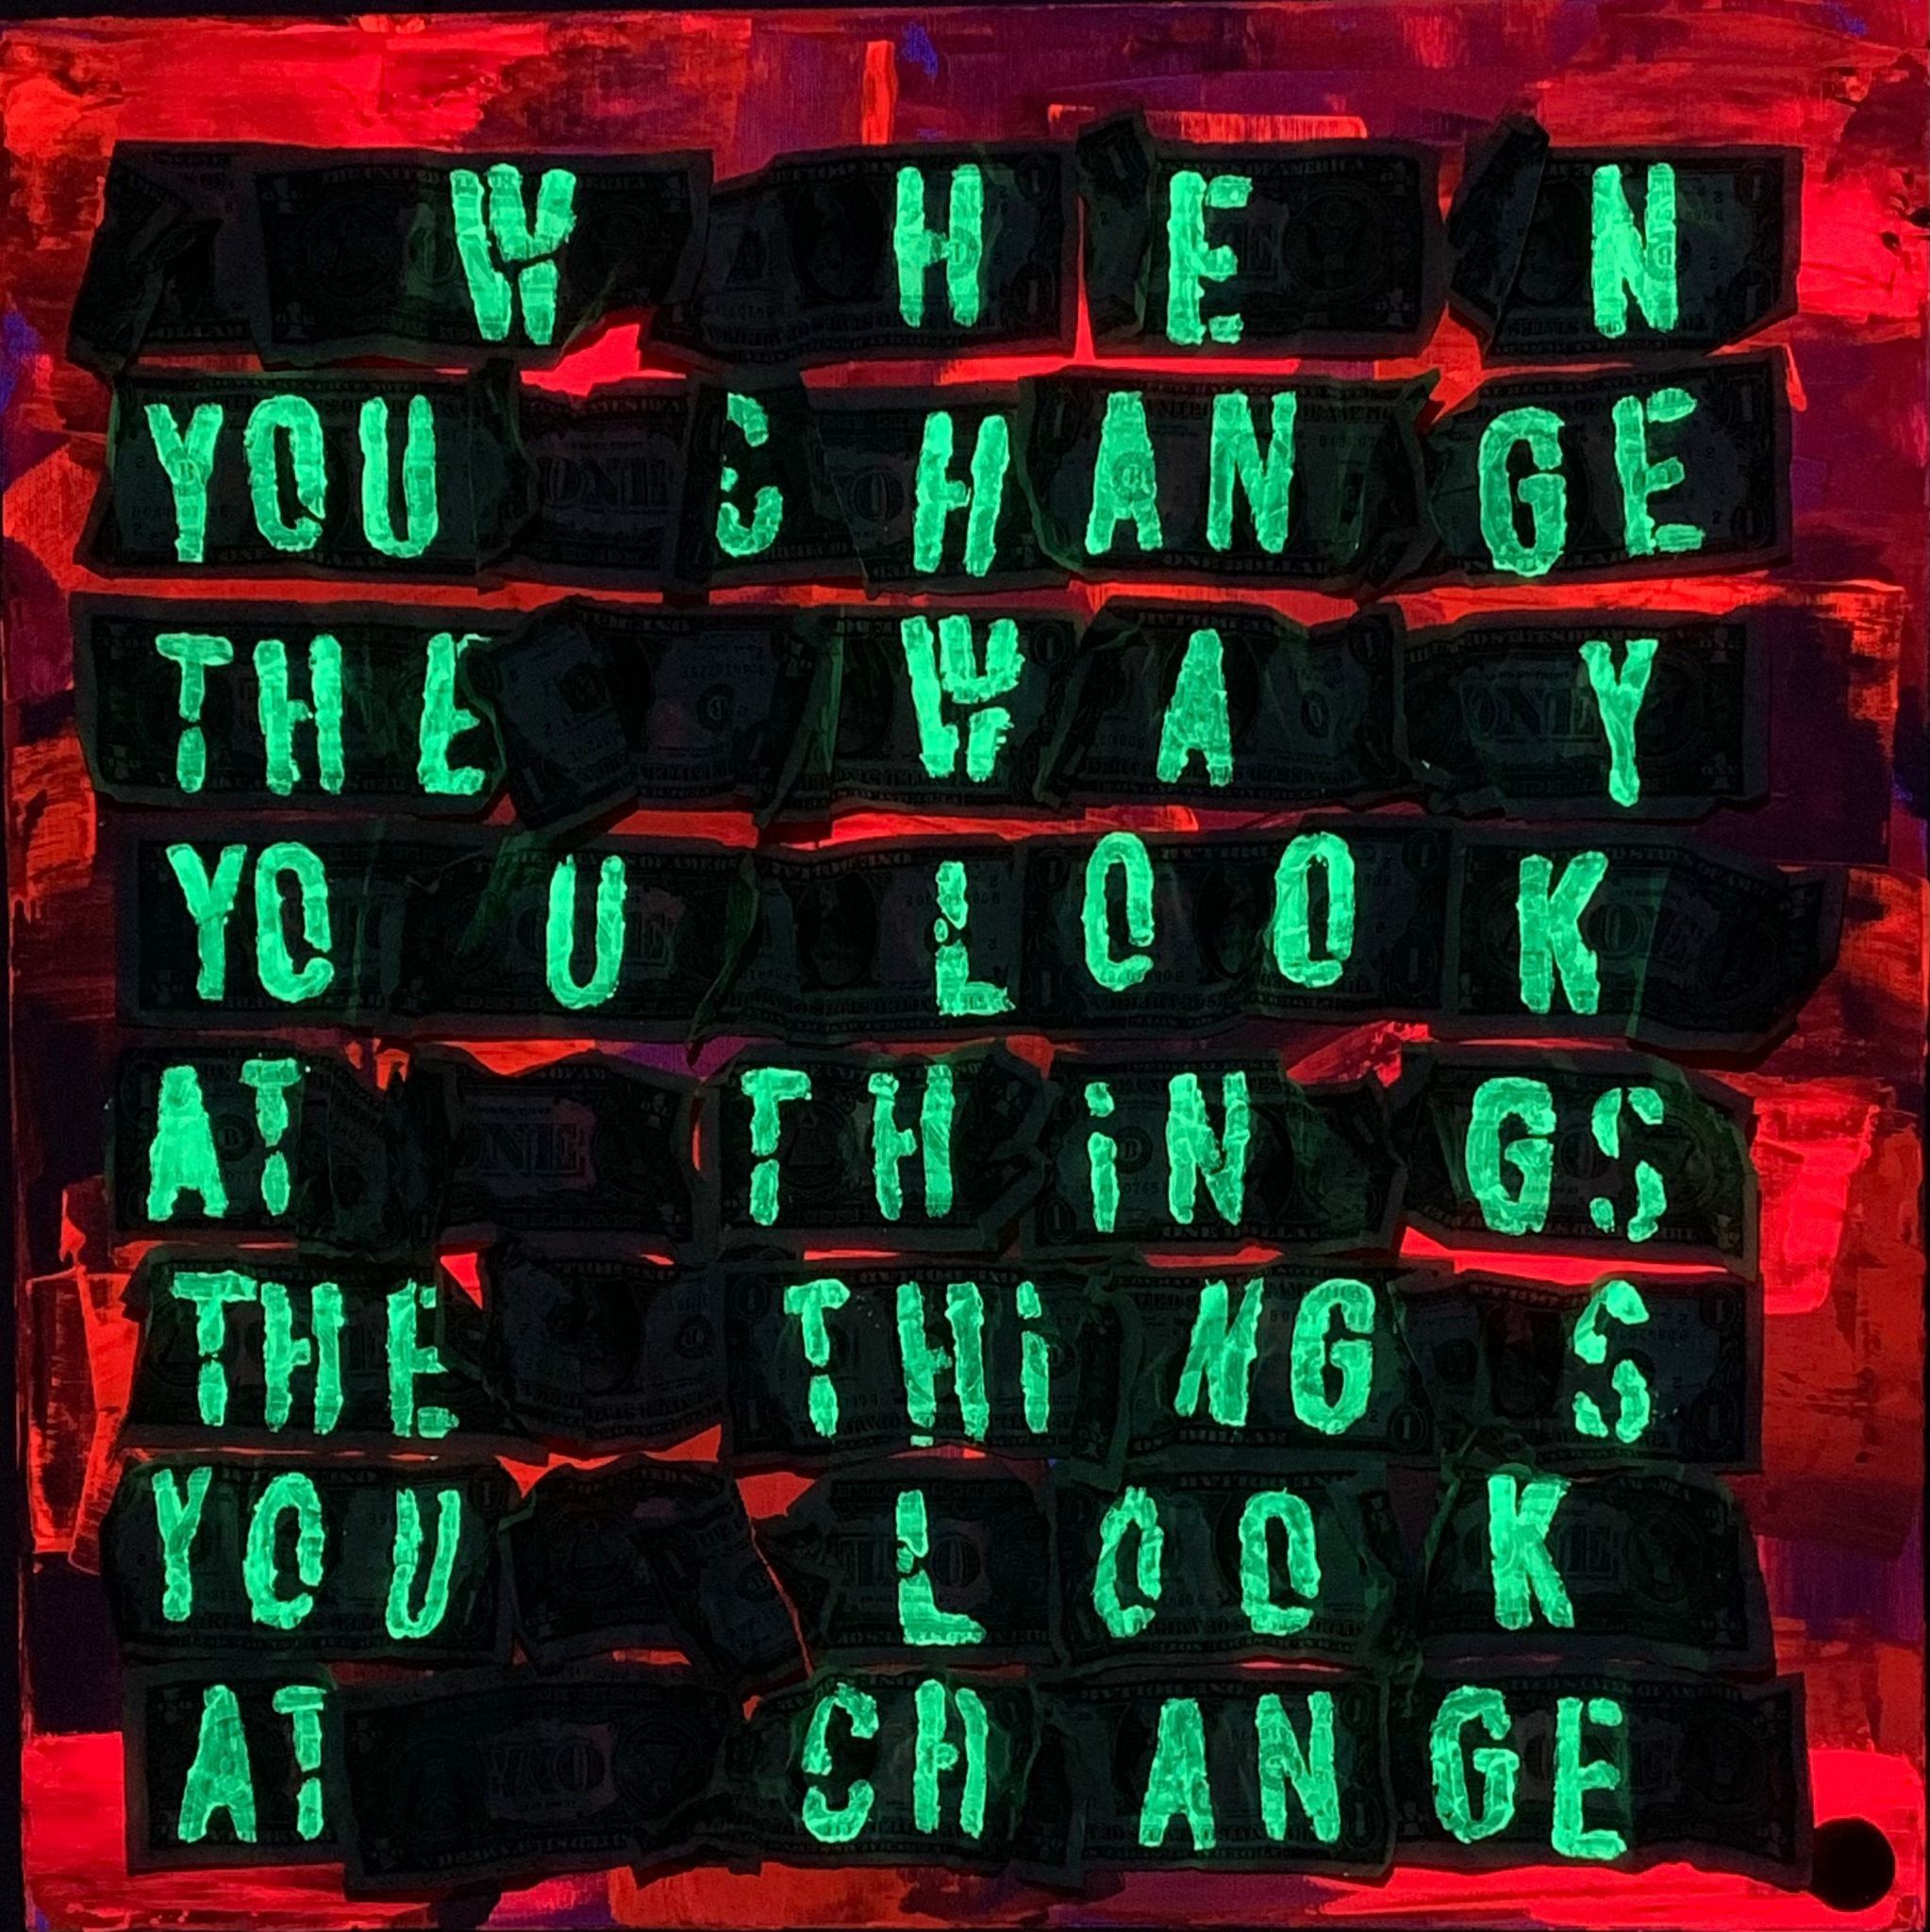 MIXED MEDIA  ROBERTA BISSOLI  ' WHEN YOU CHANGE THE WAY YOU LOOK AT THINGS THE THINGS YOU LOOK AT CHANGE '  dimensioni L 60 x H 60 x P 4 cm.